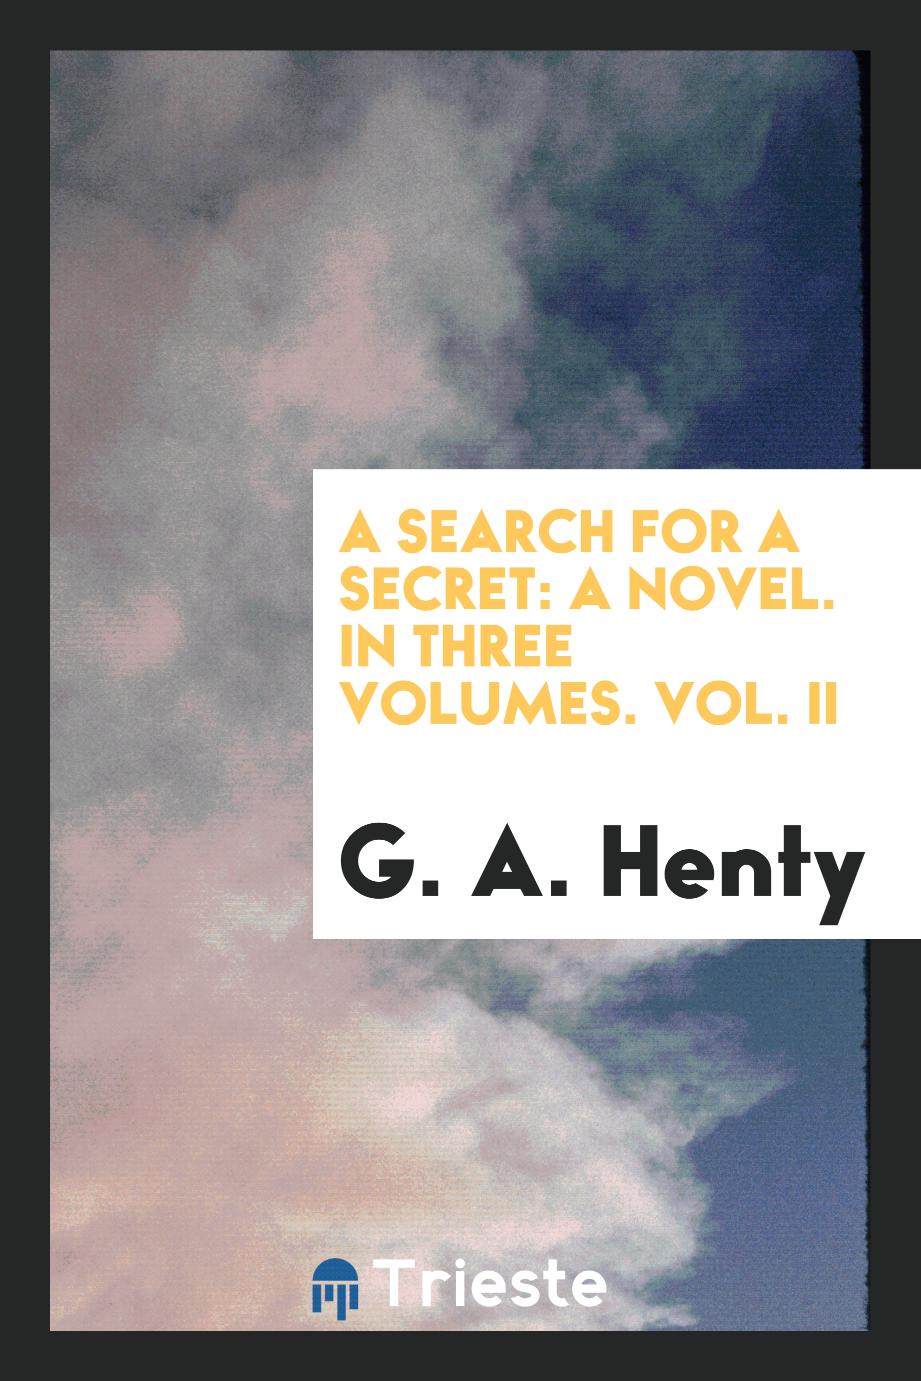 A search for a secret: a novel. In three volumes. Vol. II